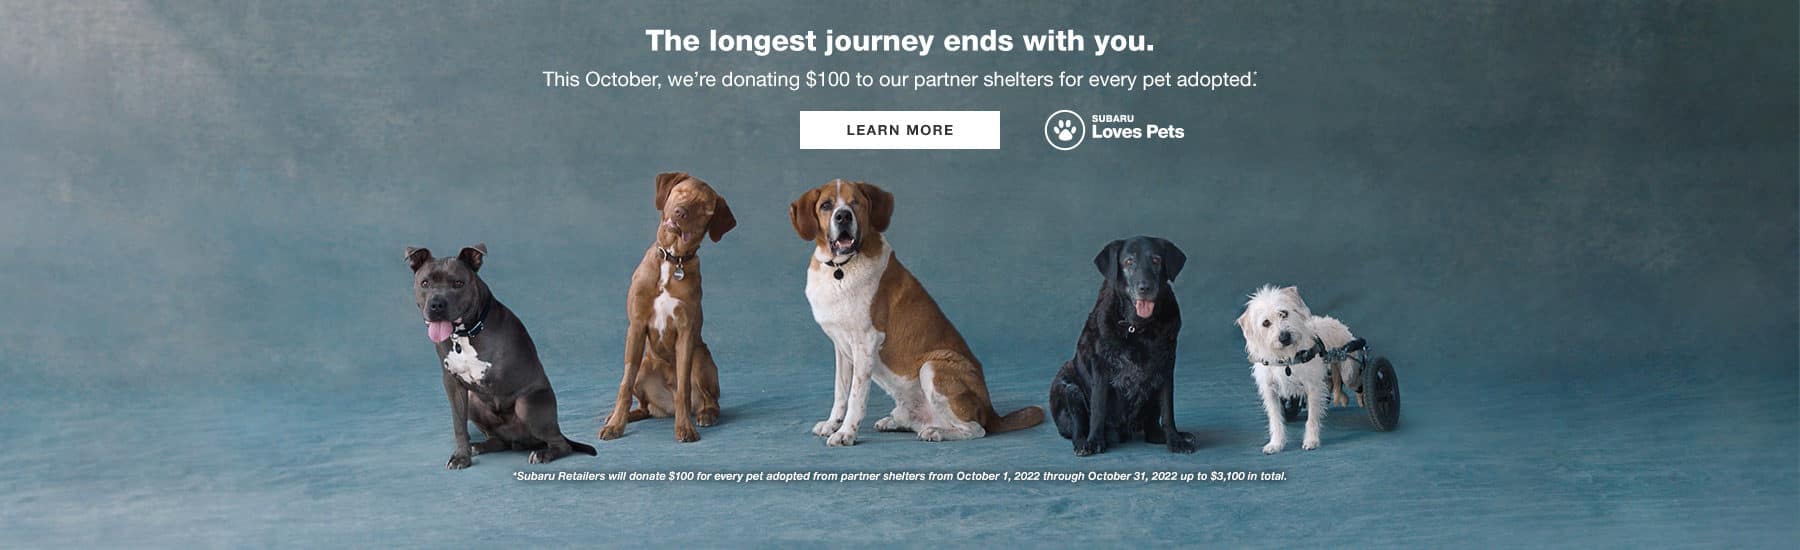 The longest journey ends with you. This October, we're donating $100 to our partner shelters for every pet adopted. Learn More.